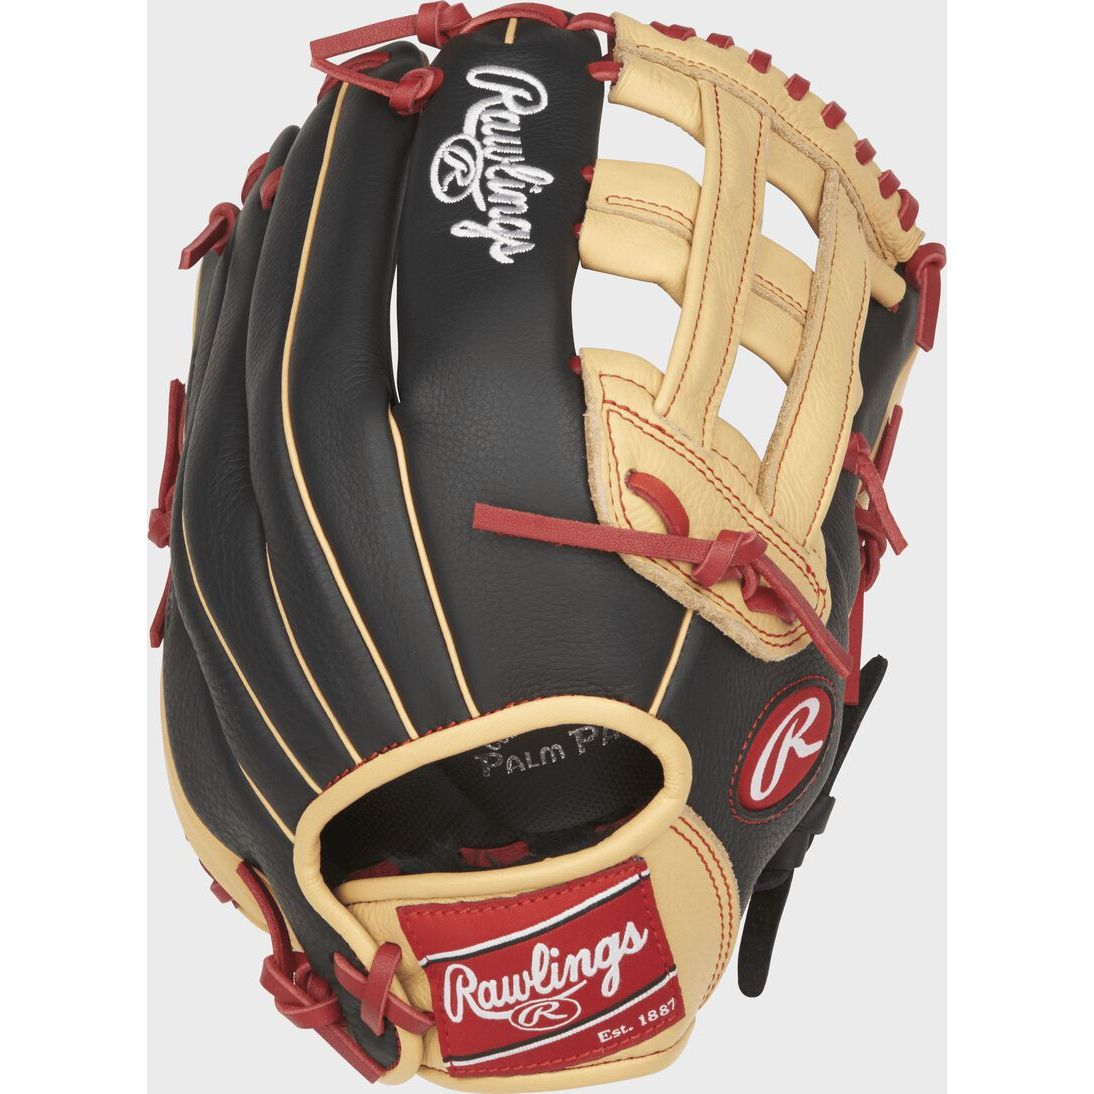 RAWLINGS "SELECT PRO LITE" SERIES BASEBALL GLOVE YOUTH 12" (right hand glove) - BRYCE HARPER